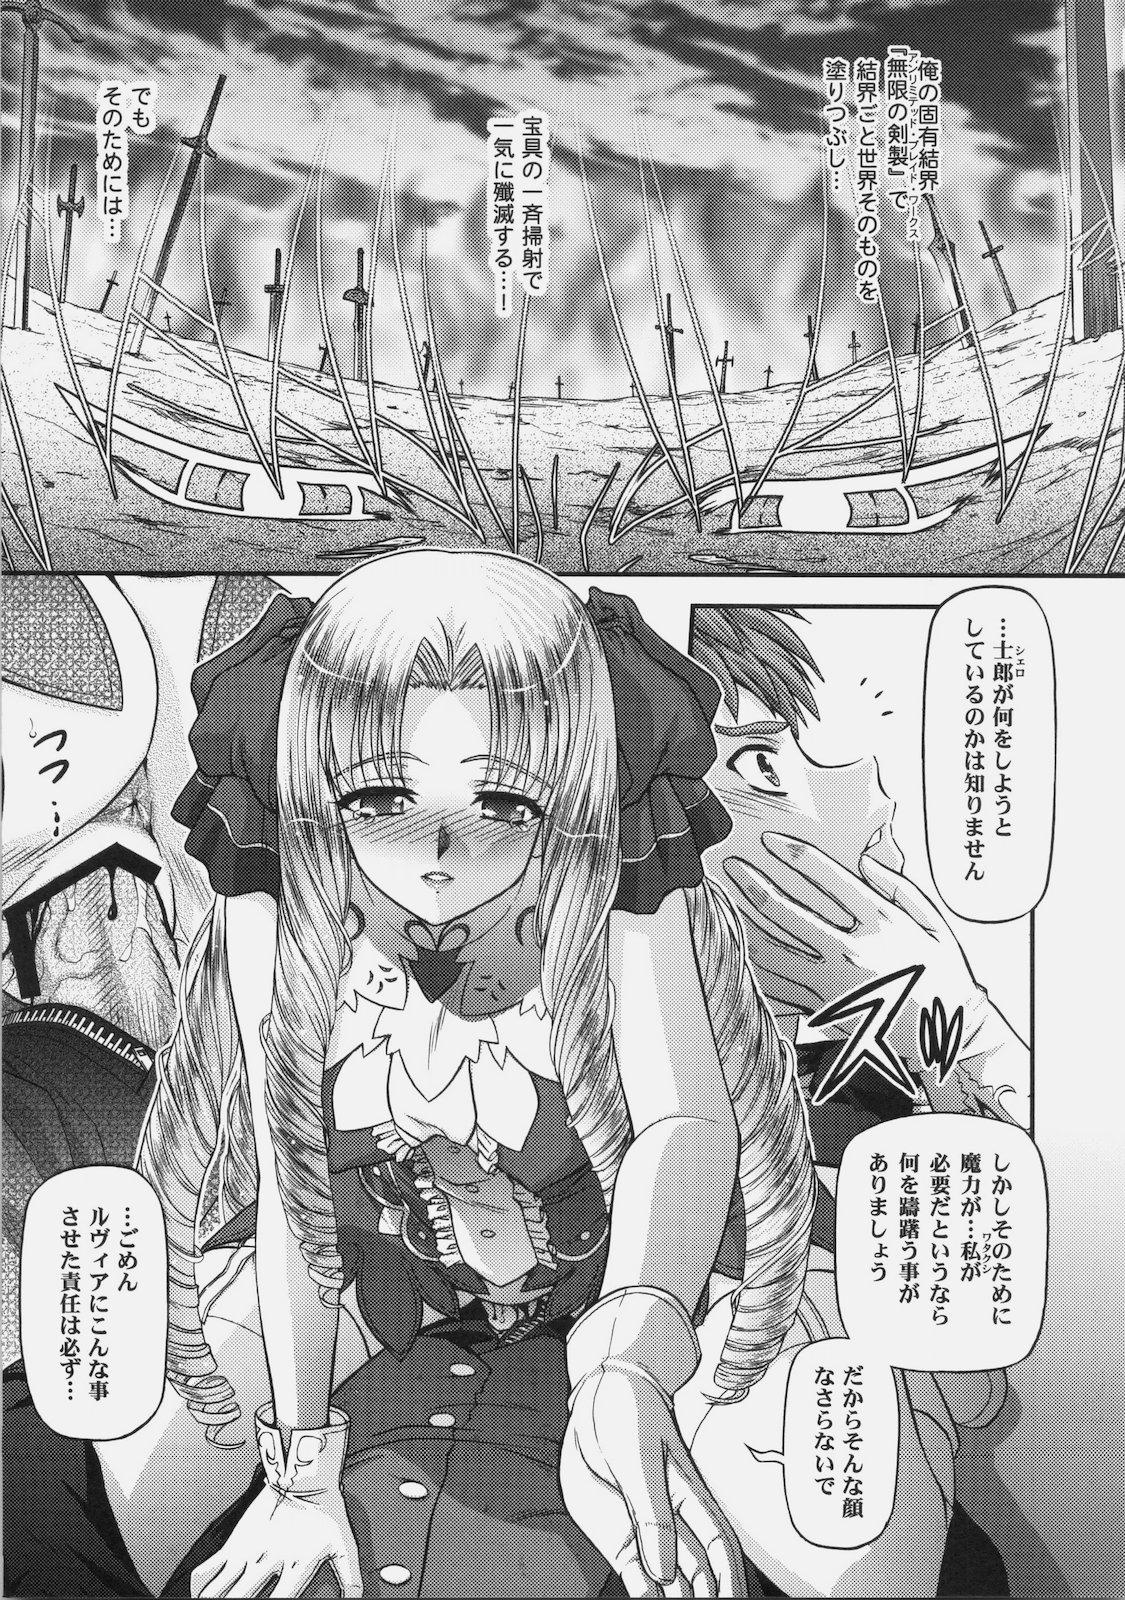 Shecock BLUE BLOOD'S vol.26 - Fate hollow ataraxia Gay Outinpublic - Page 9